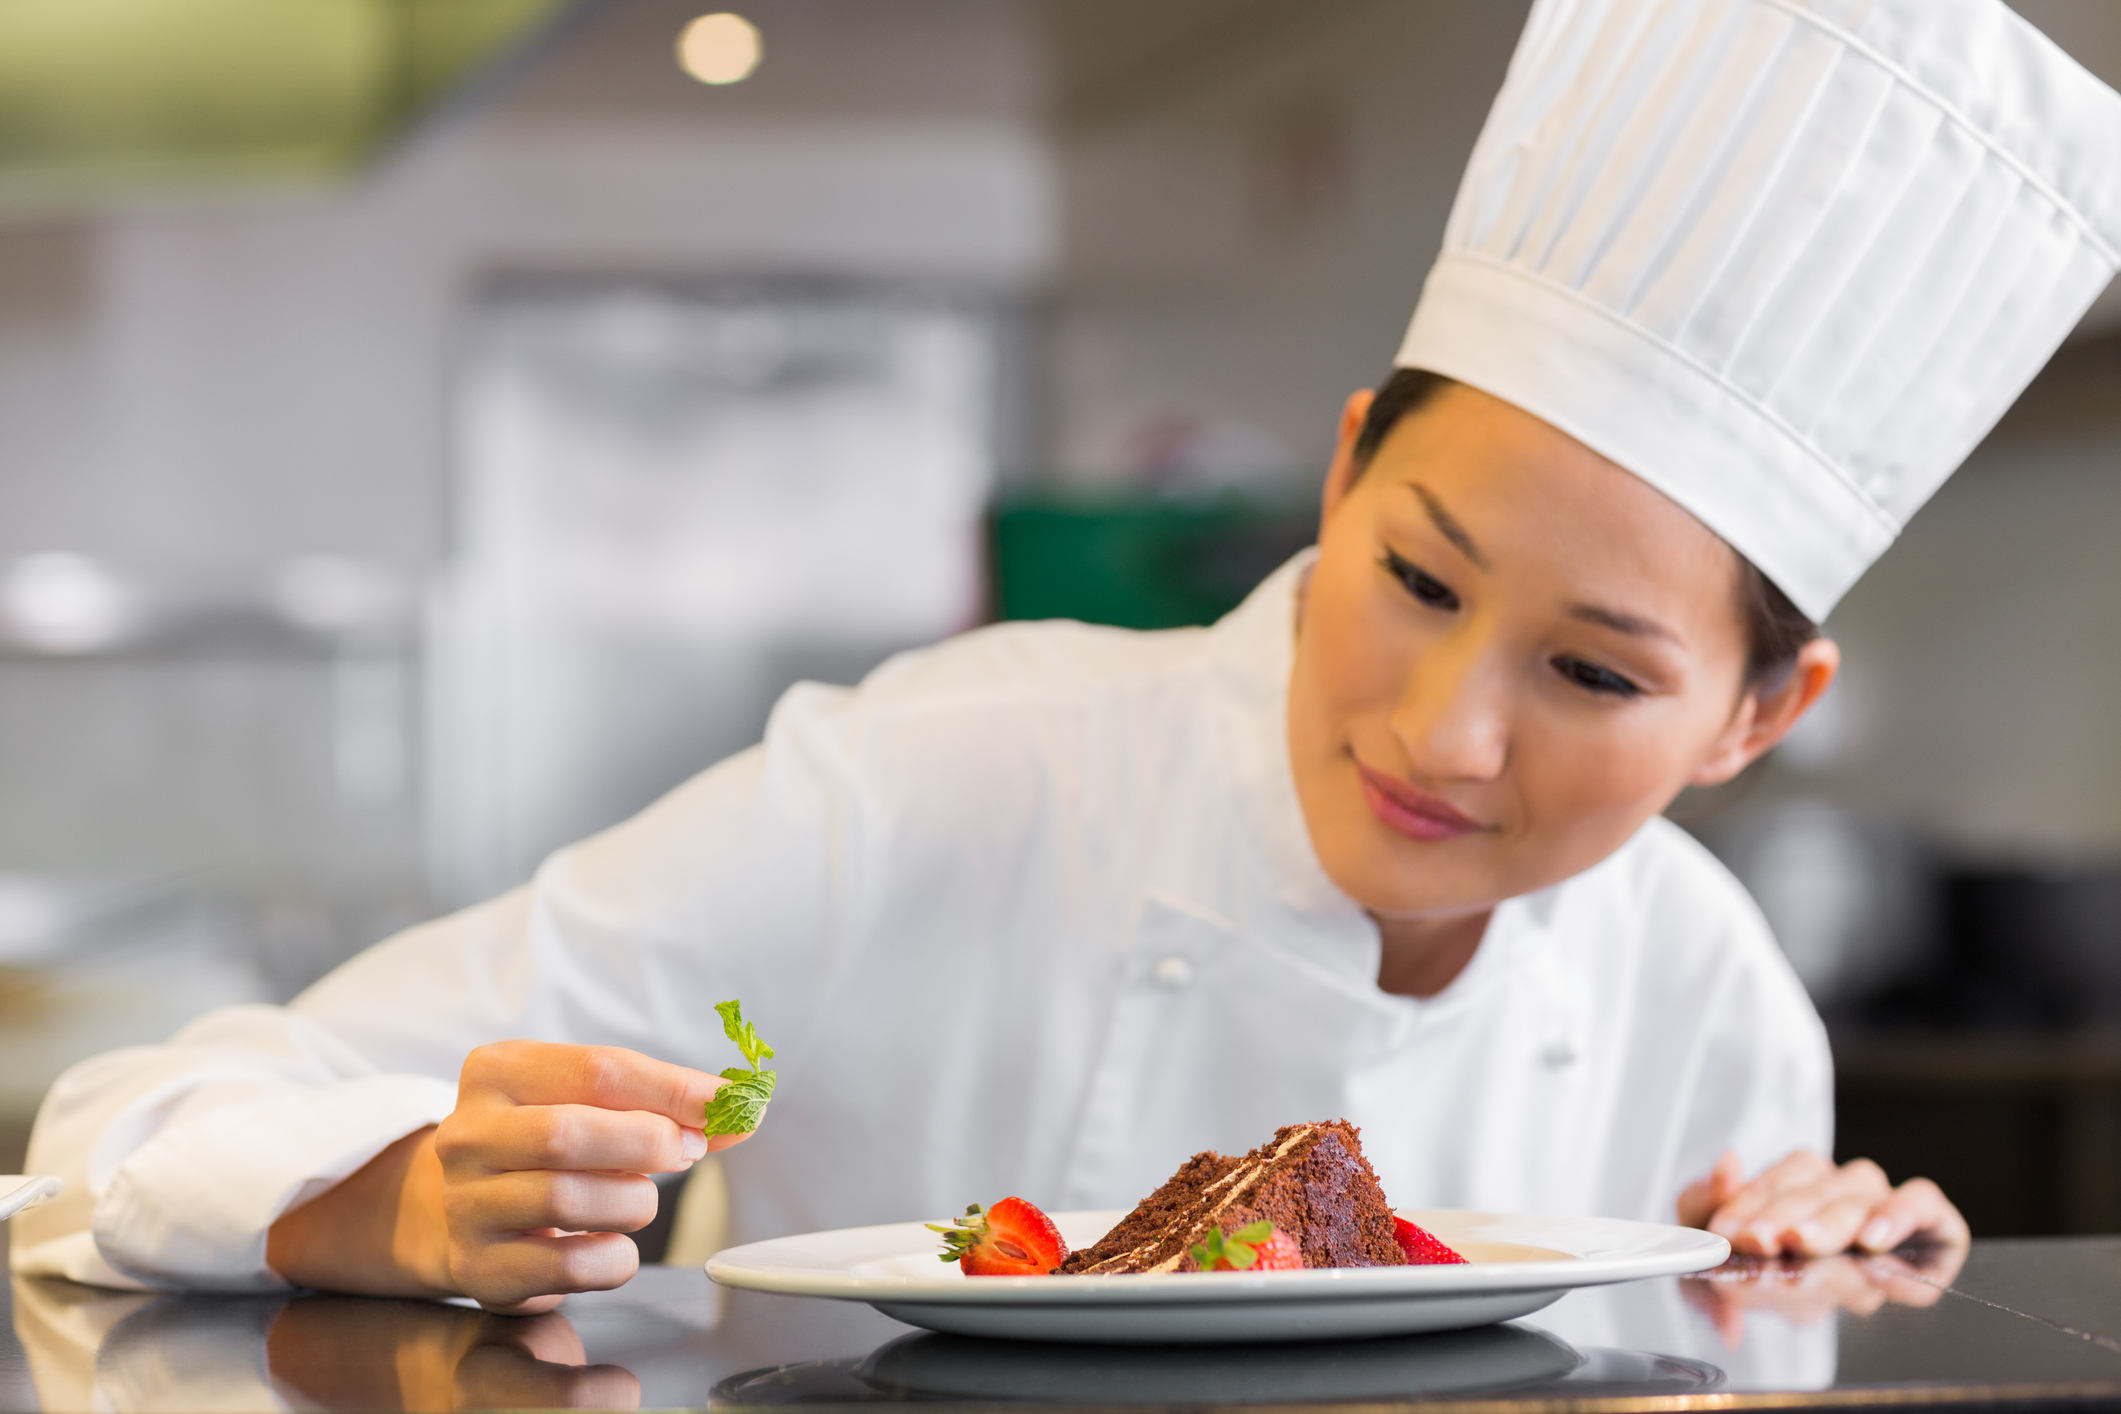 Closeup of a concentrated female chef garnishing food in the kitchen